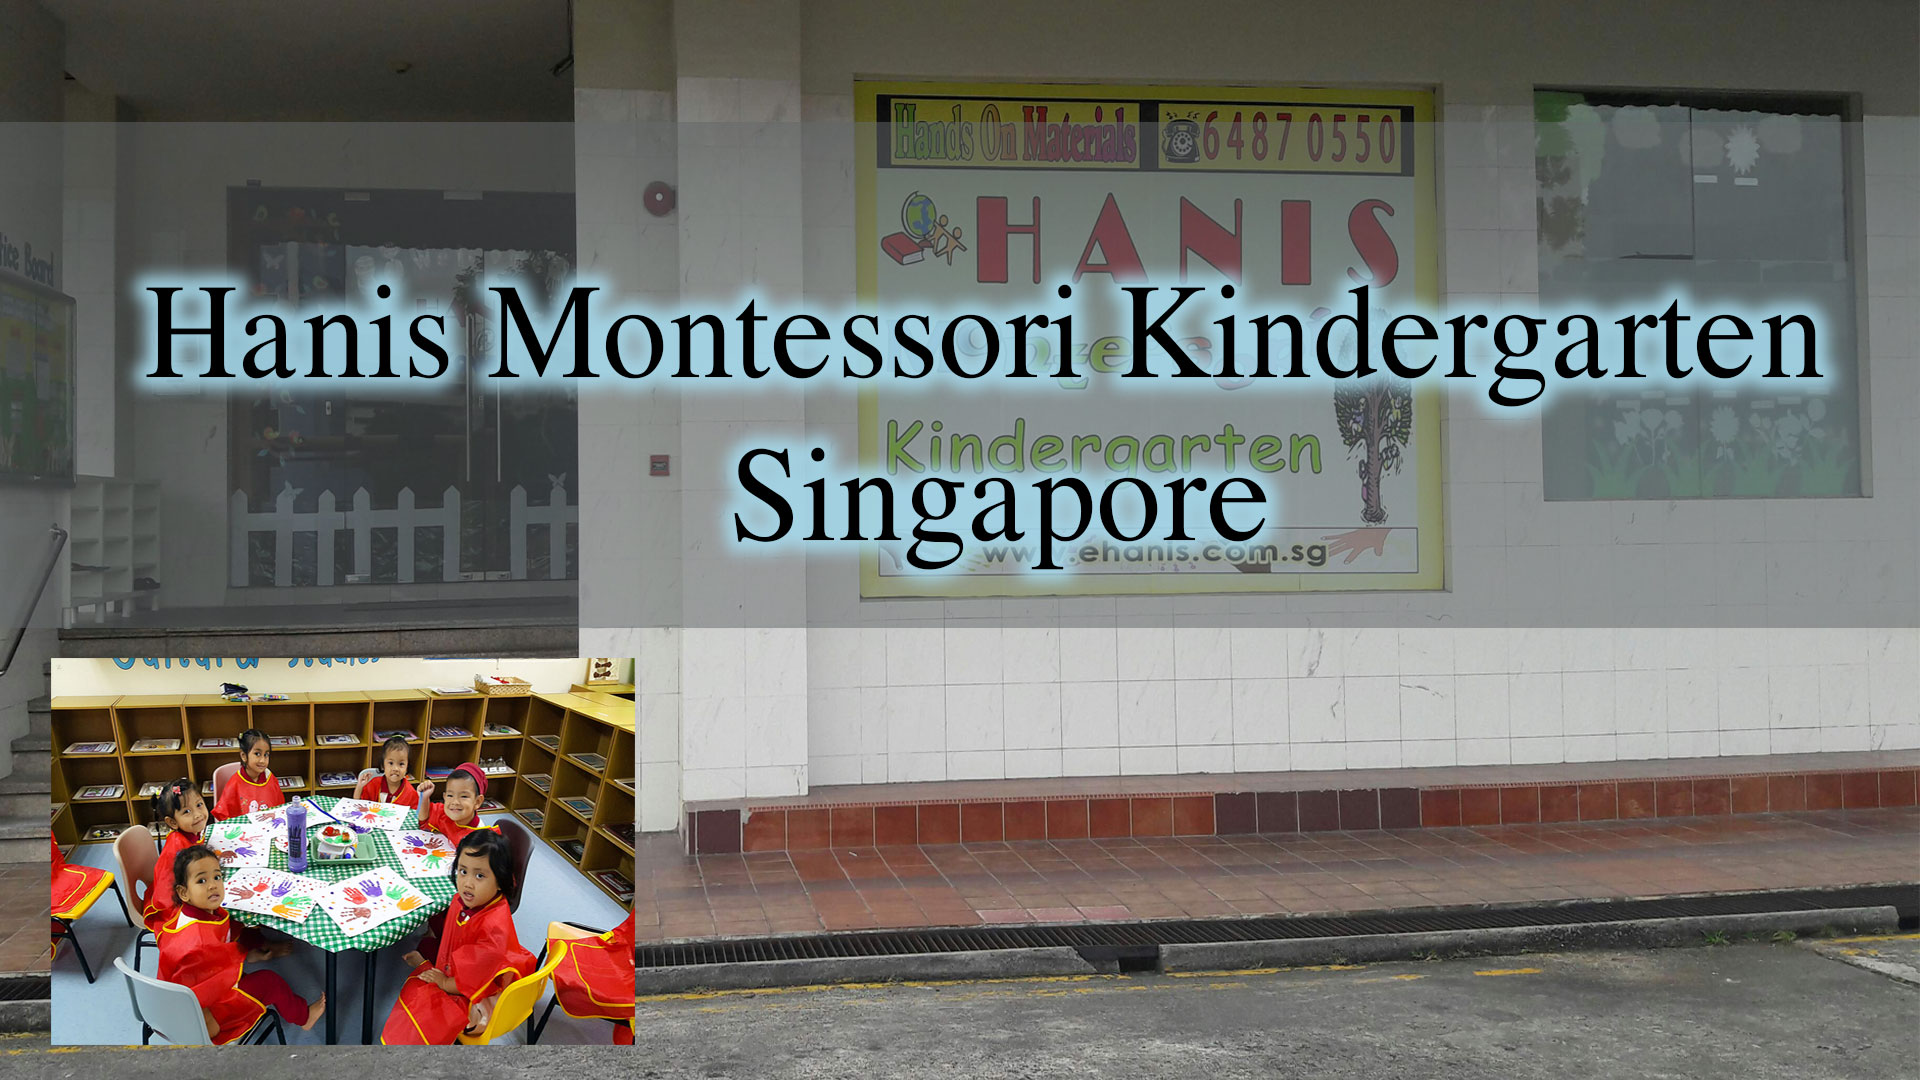 From Myra Condo to Hanis Montessori Kindergarten Singapore, it only takes about 3 min drive (700m).